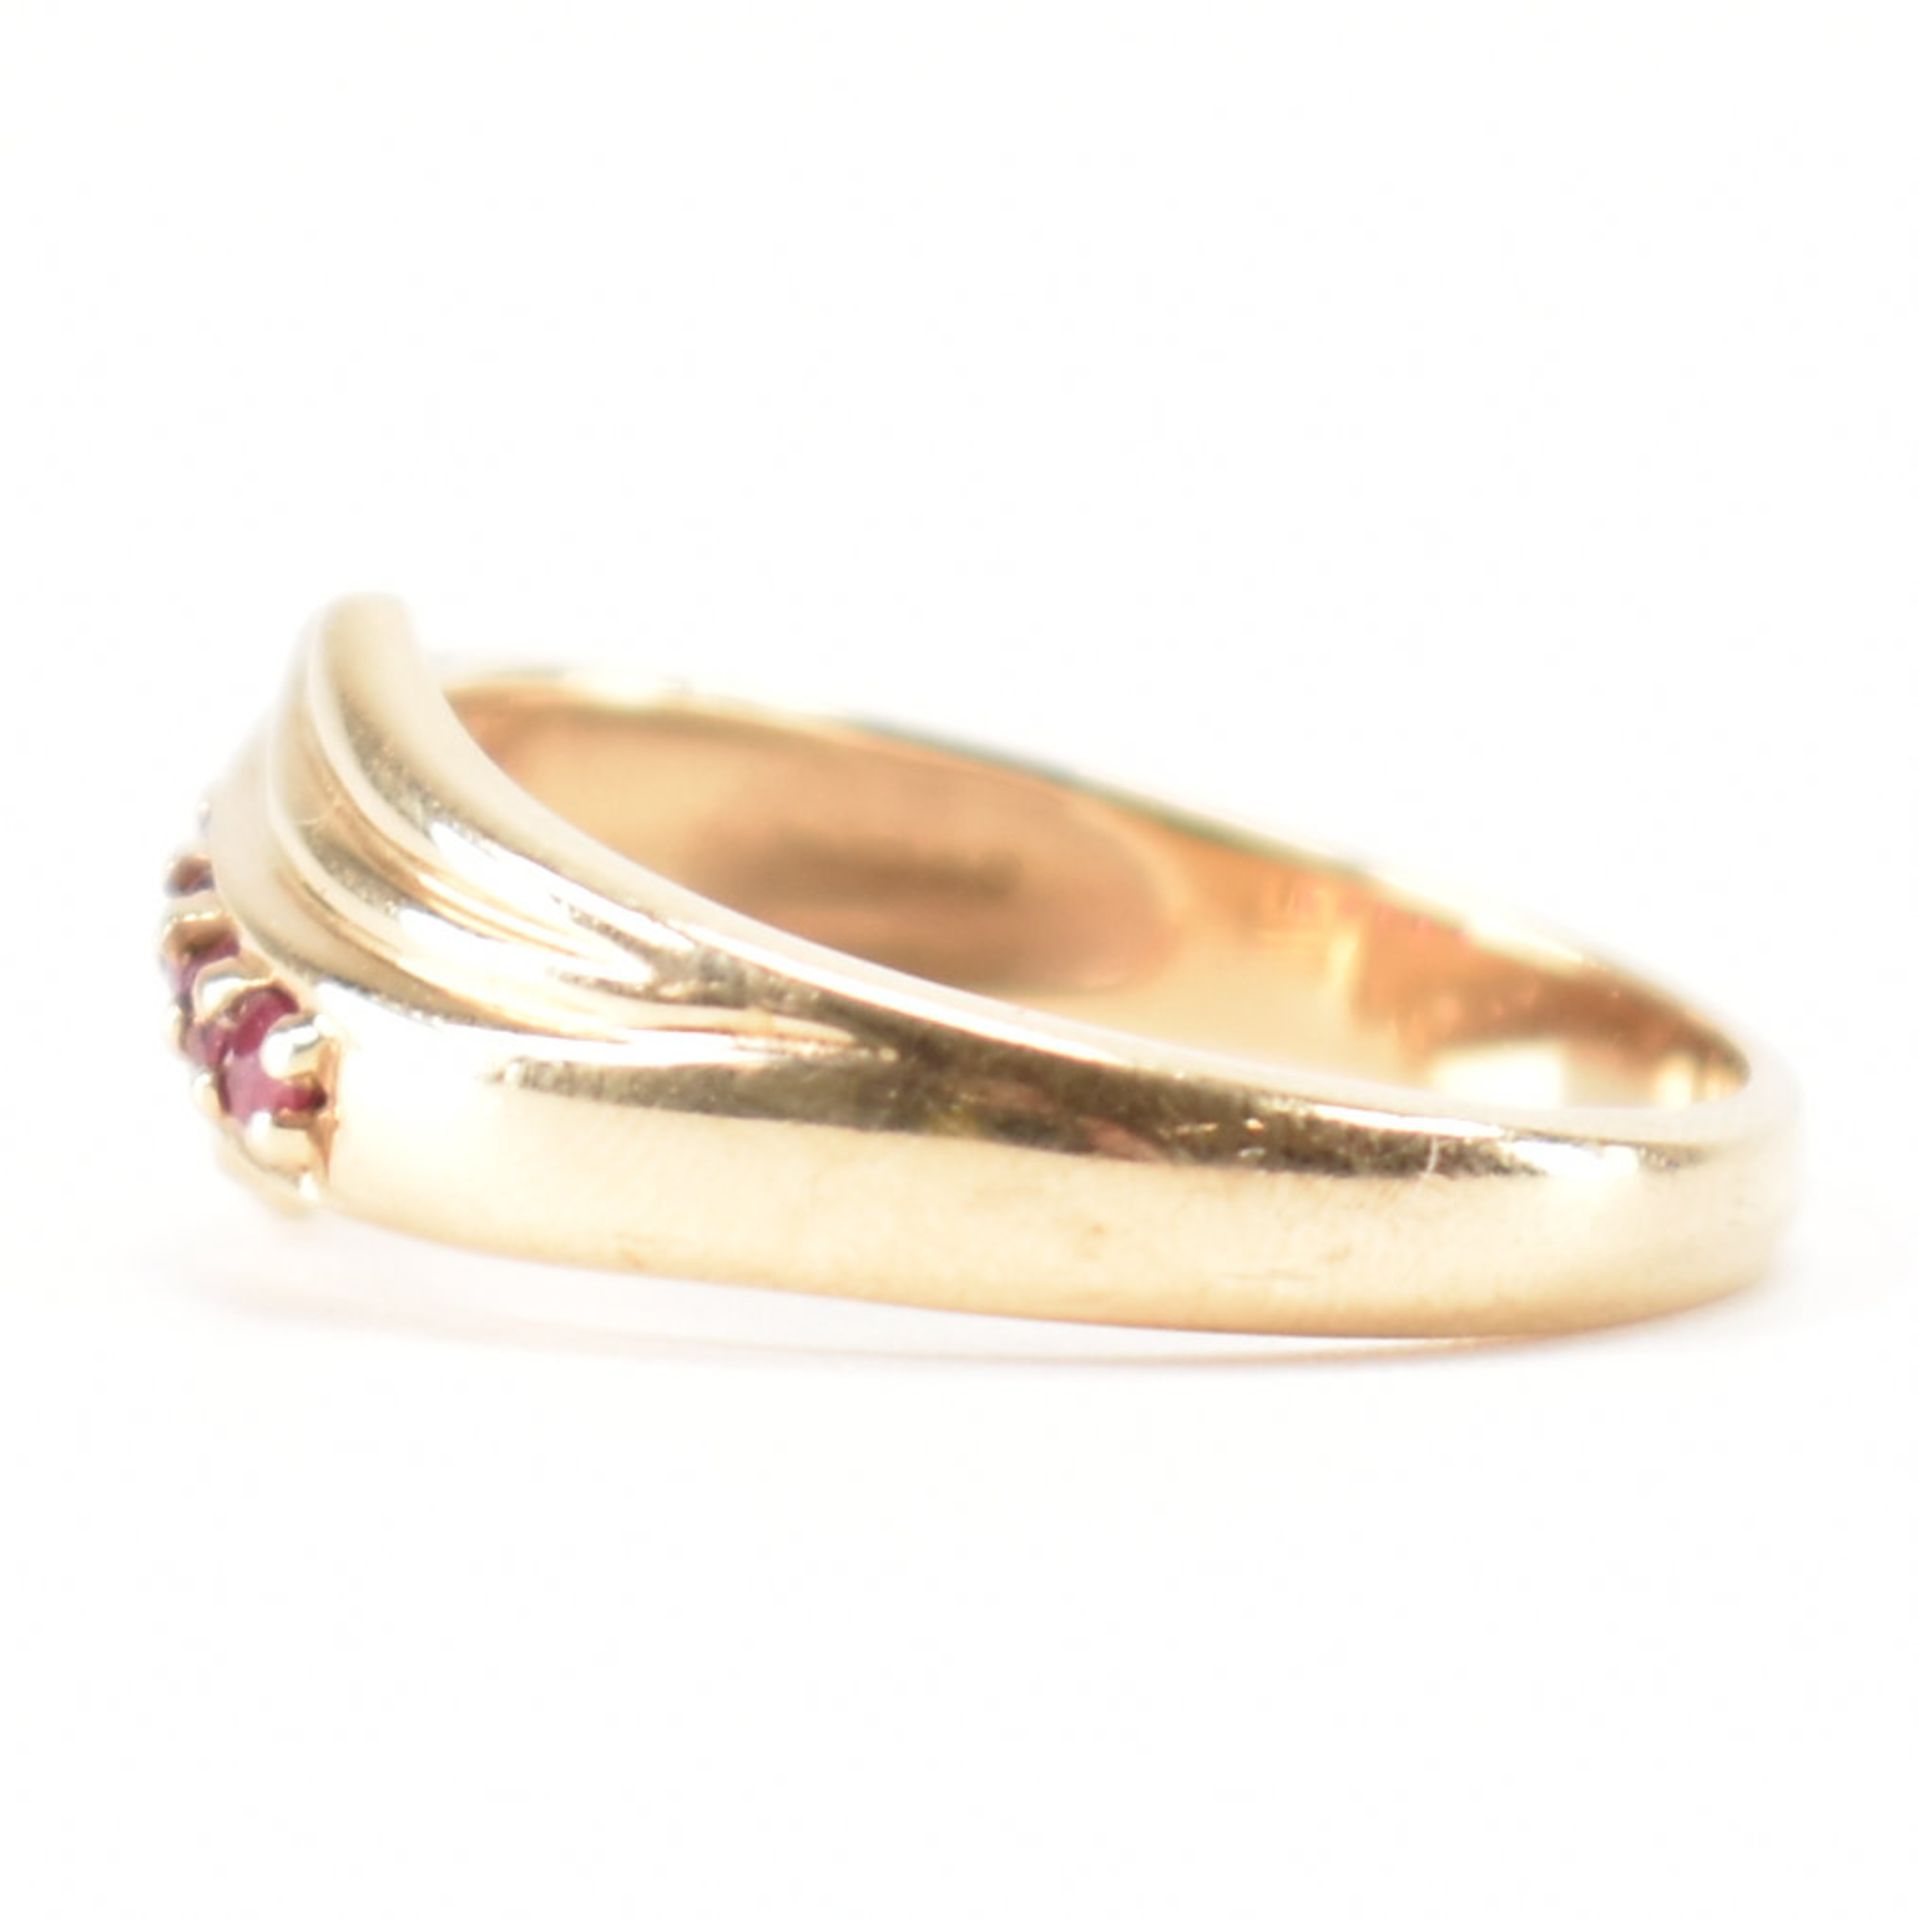 HALLMARKED 9CT GOLD RUBY RING - Image 2 of 8